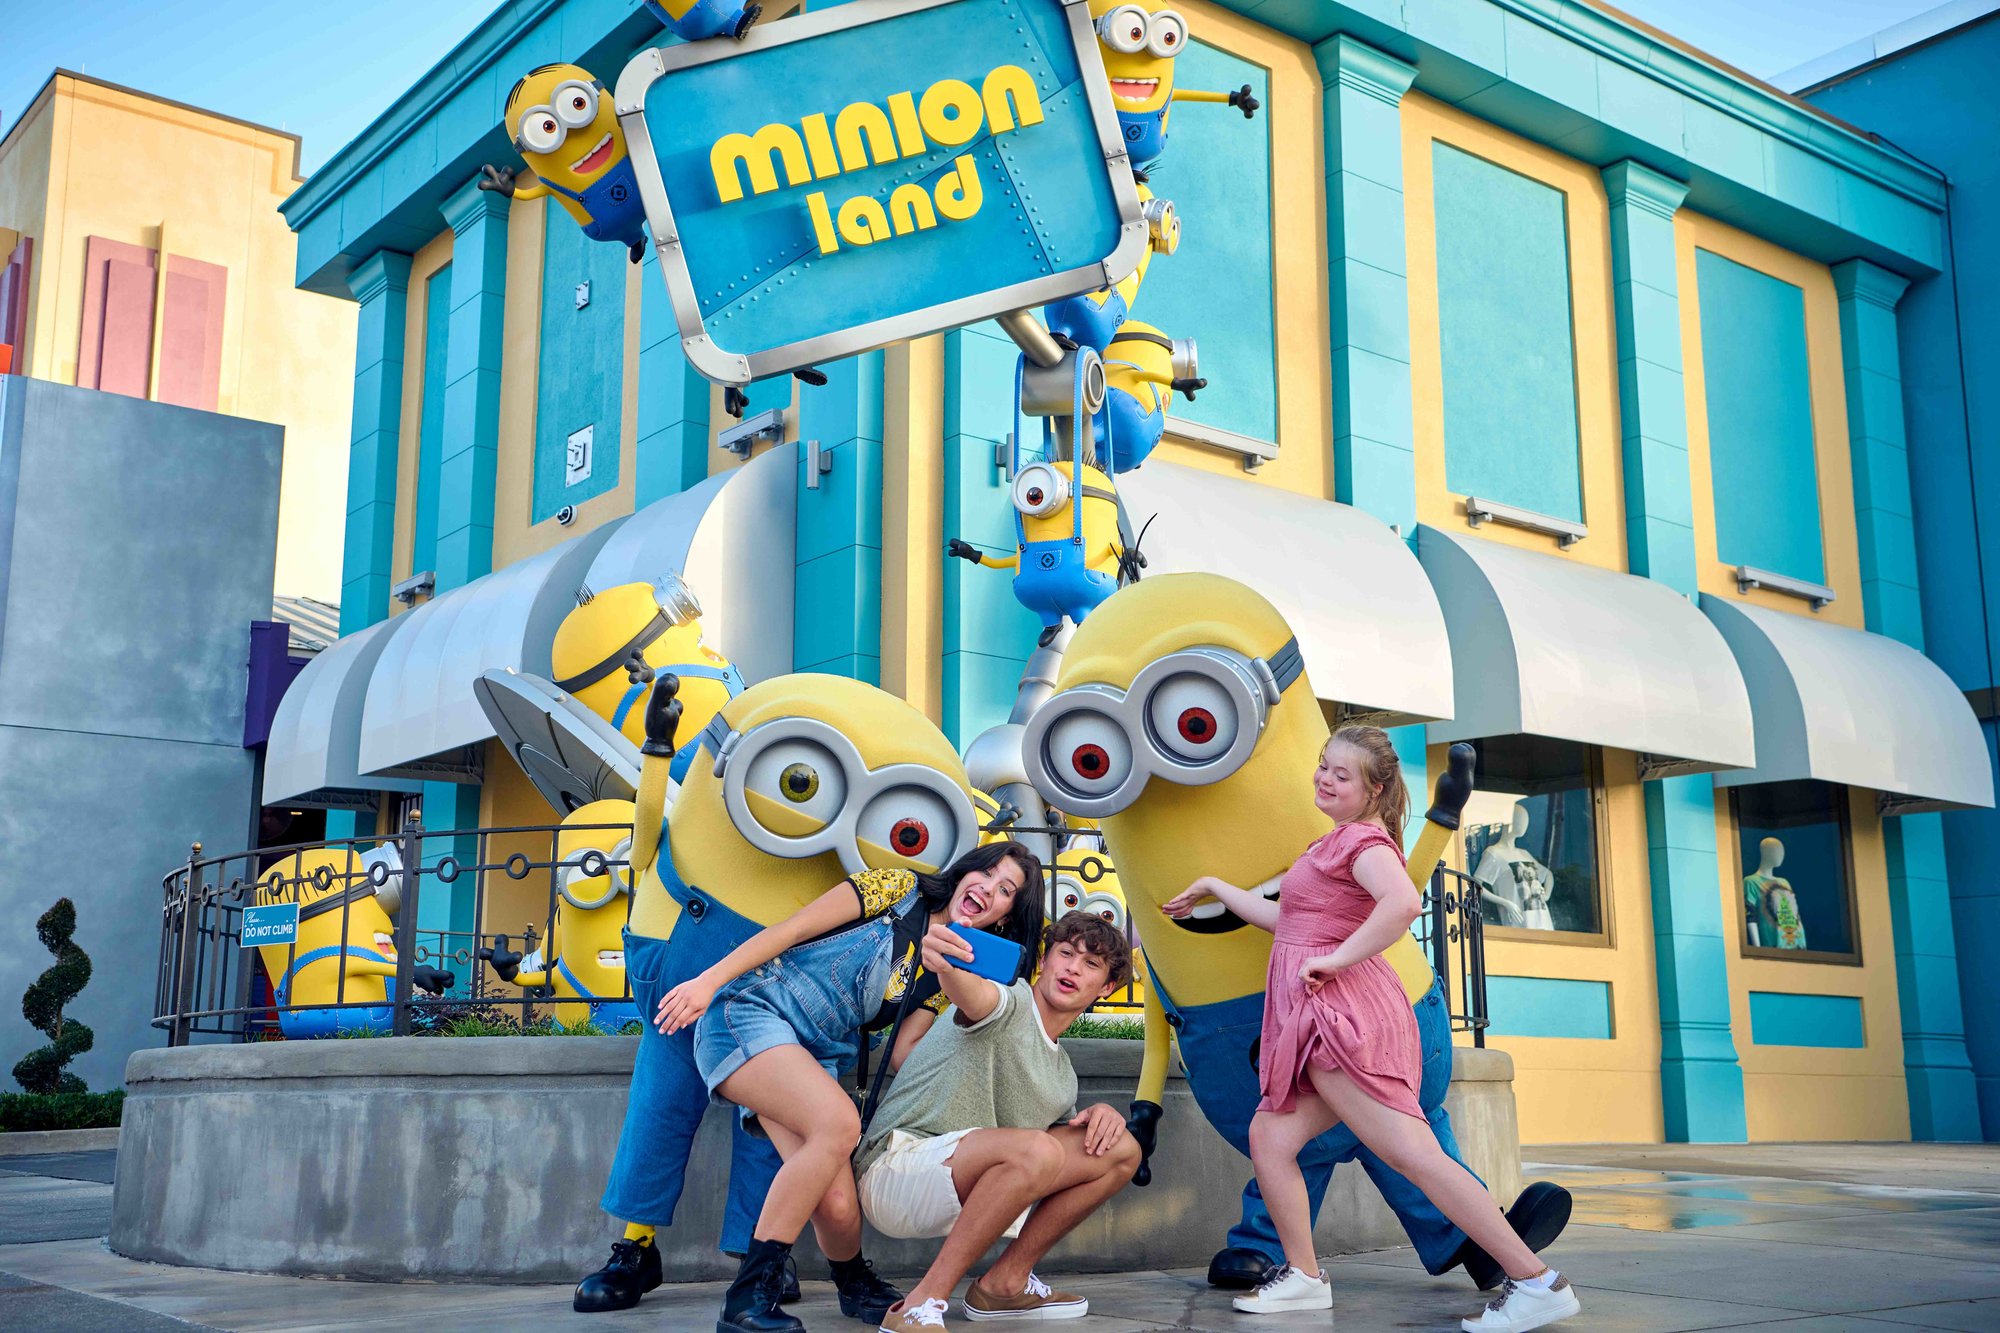 minion land marquee with three people in front